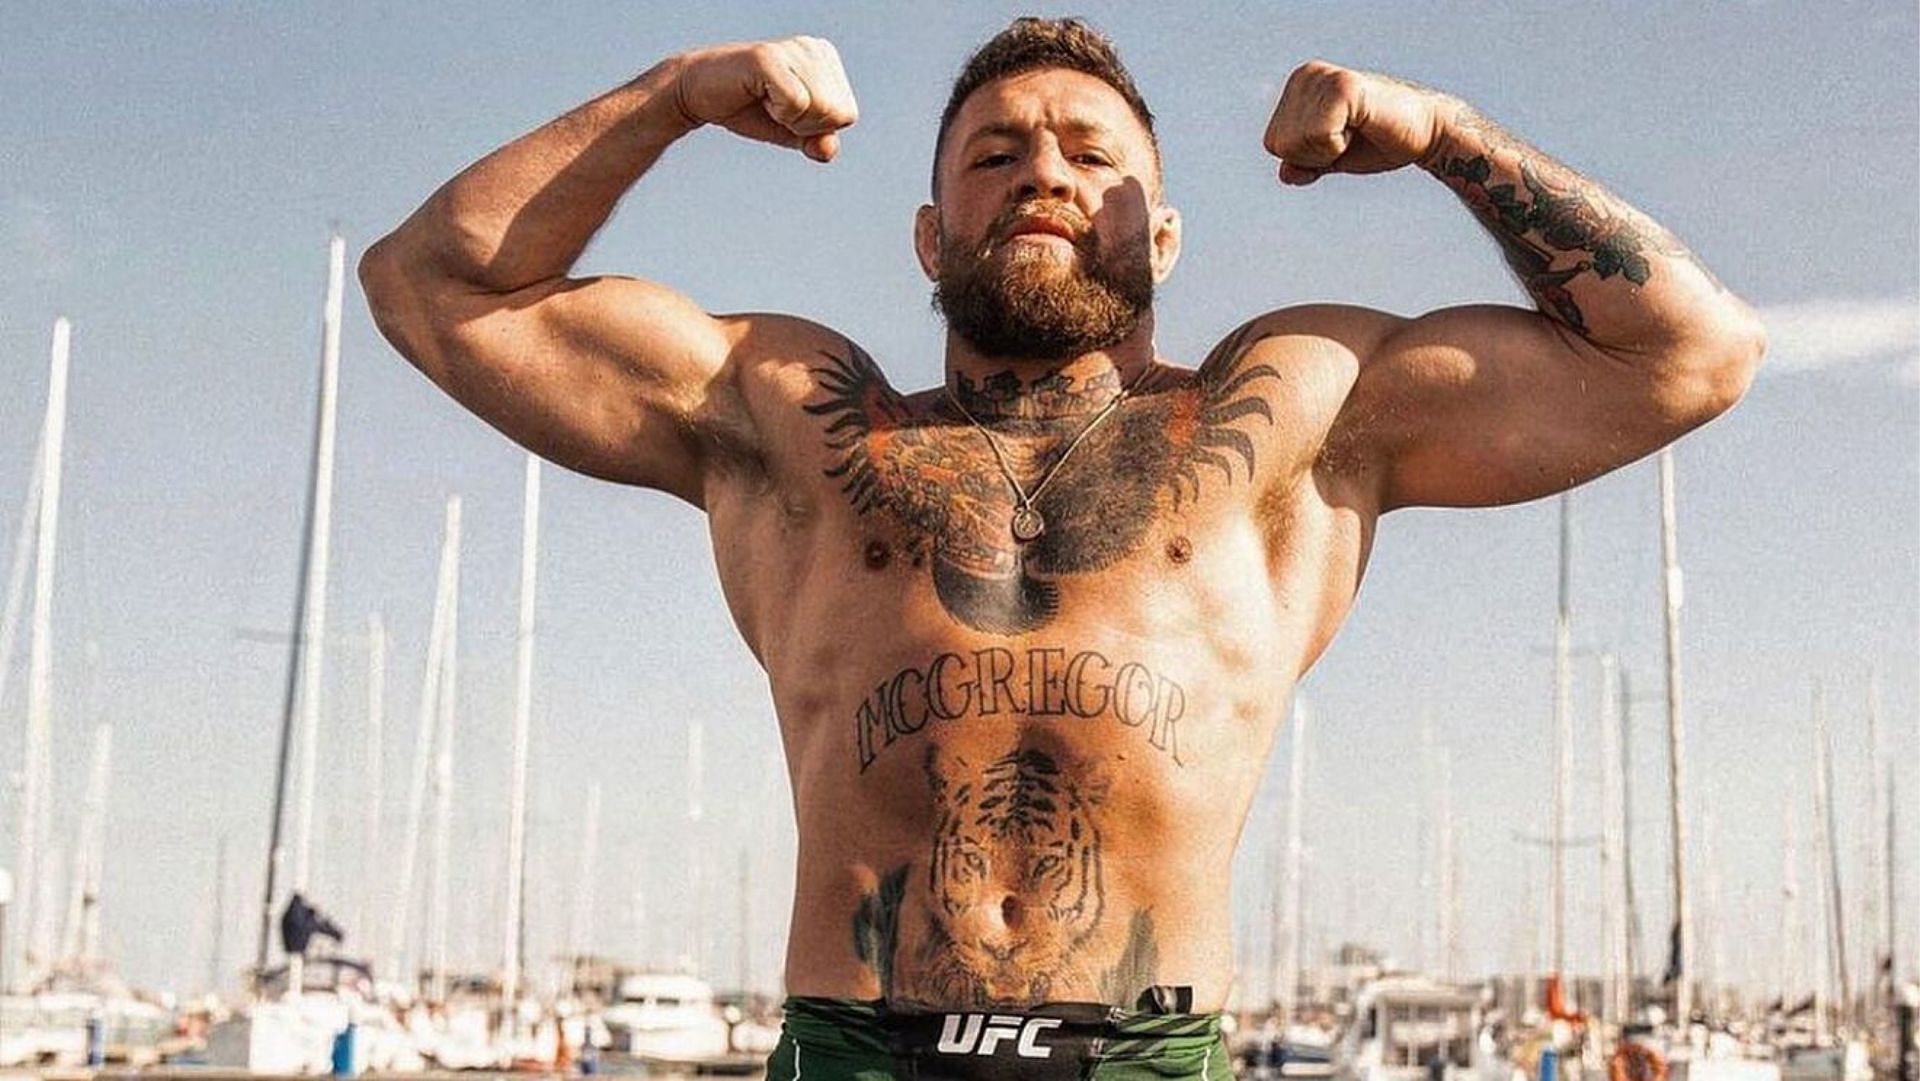 Conor McGregor created history in the UFC